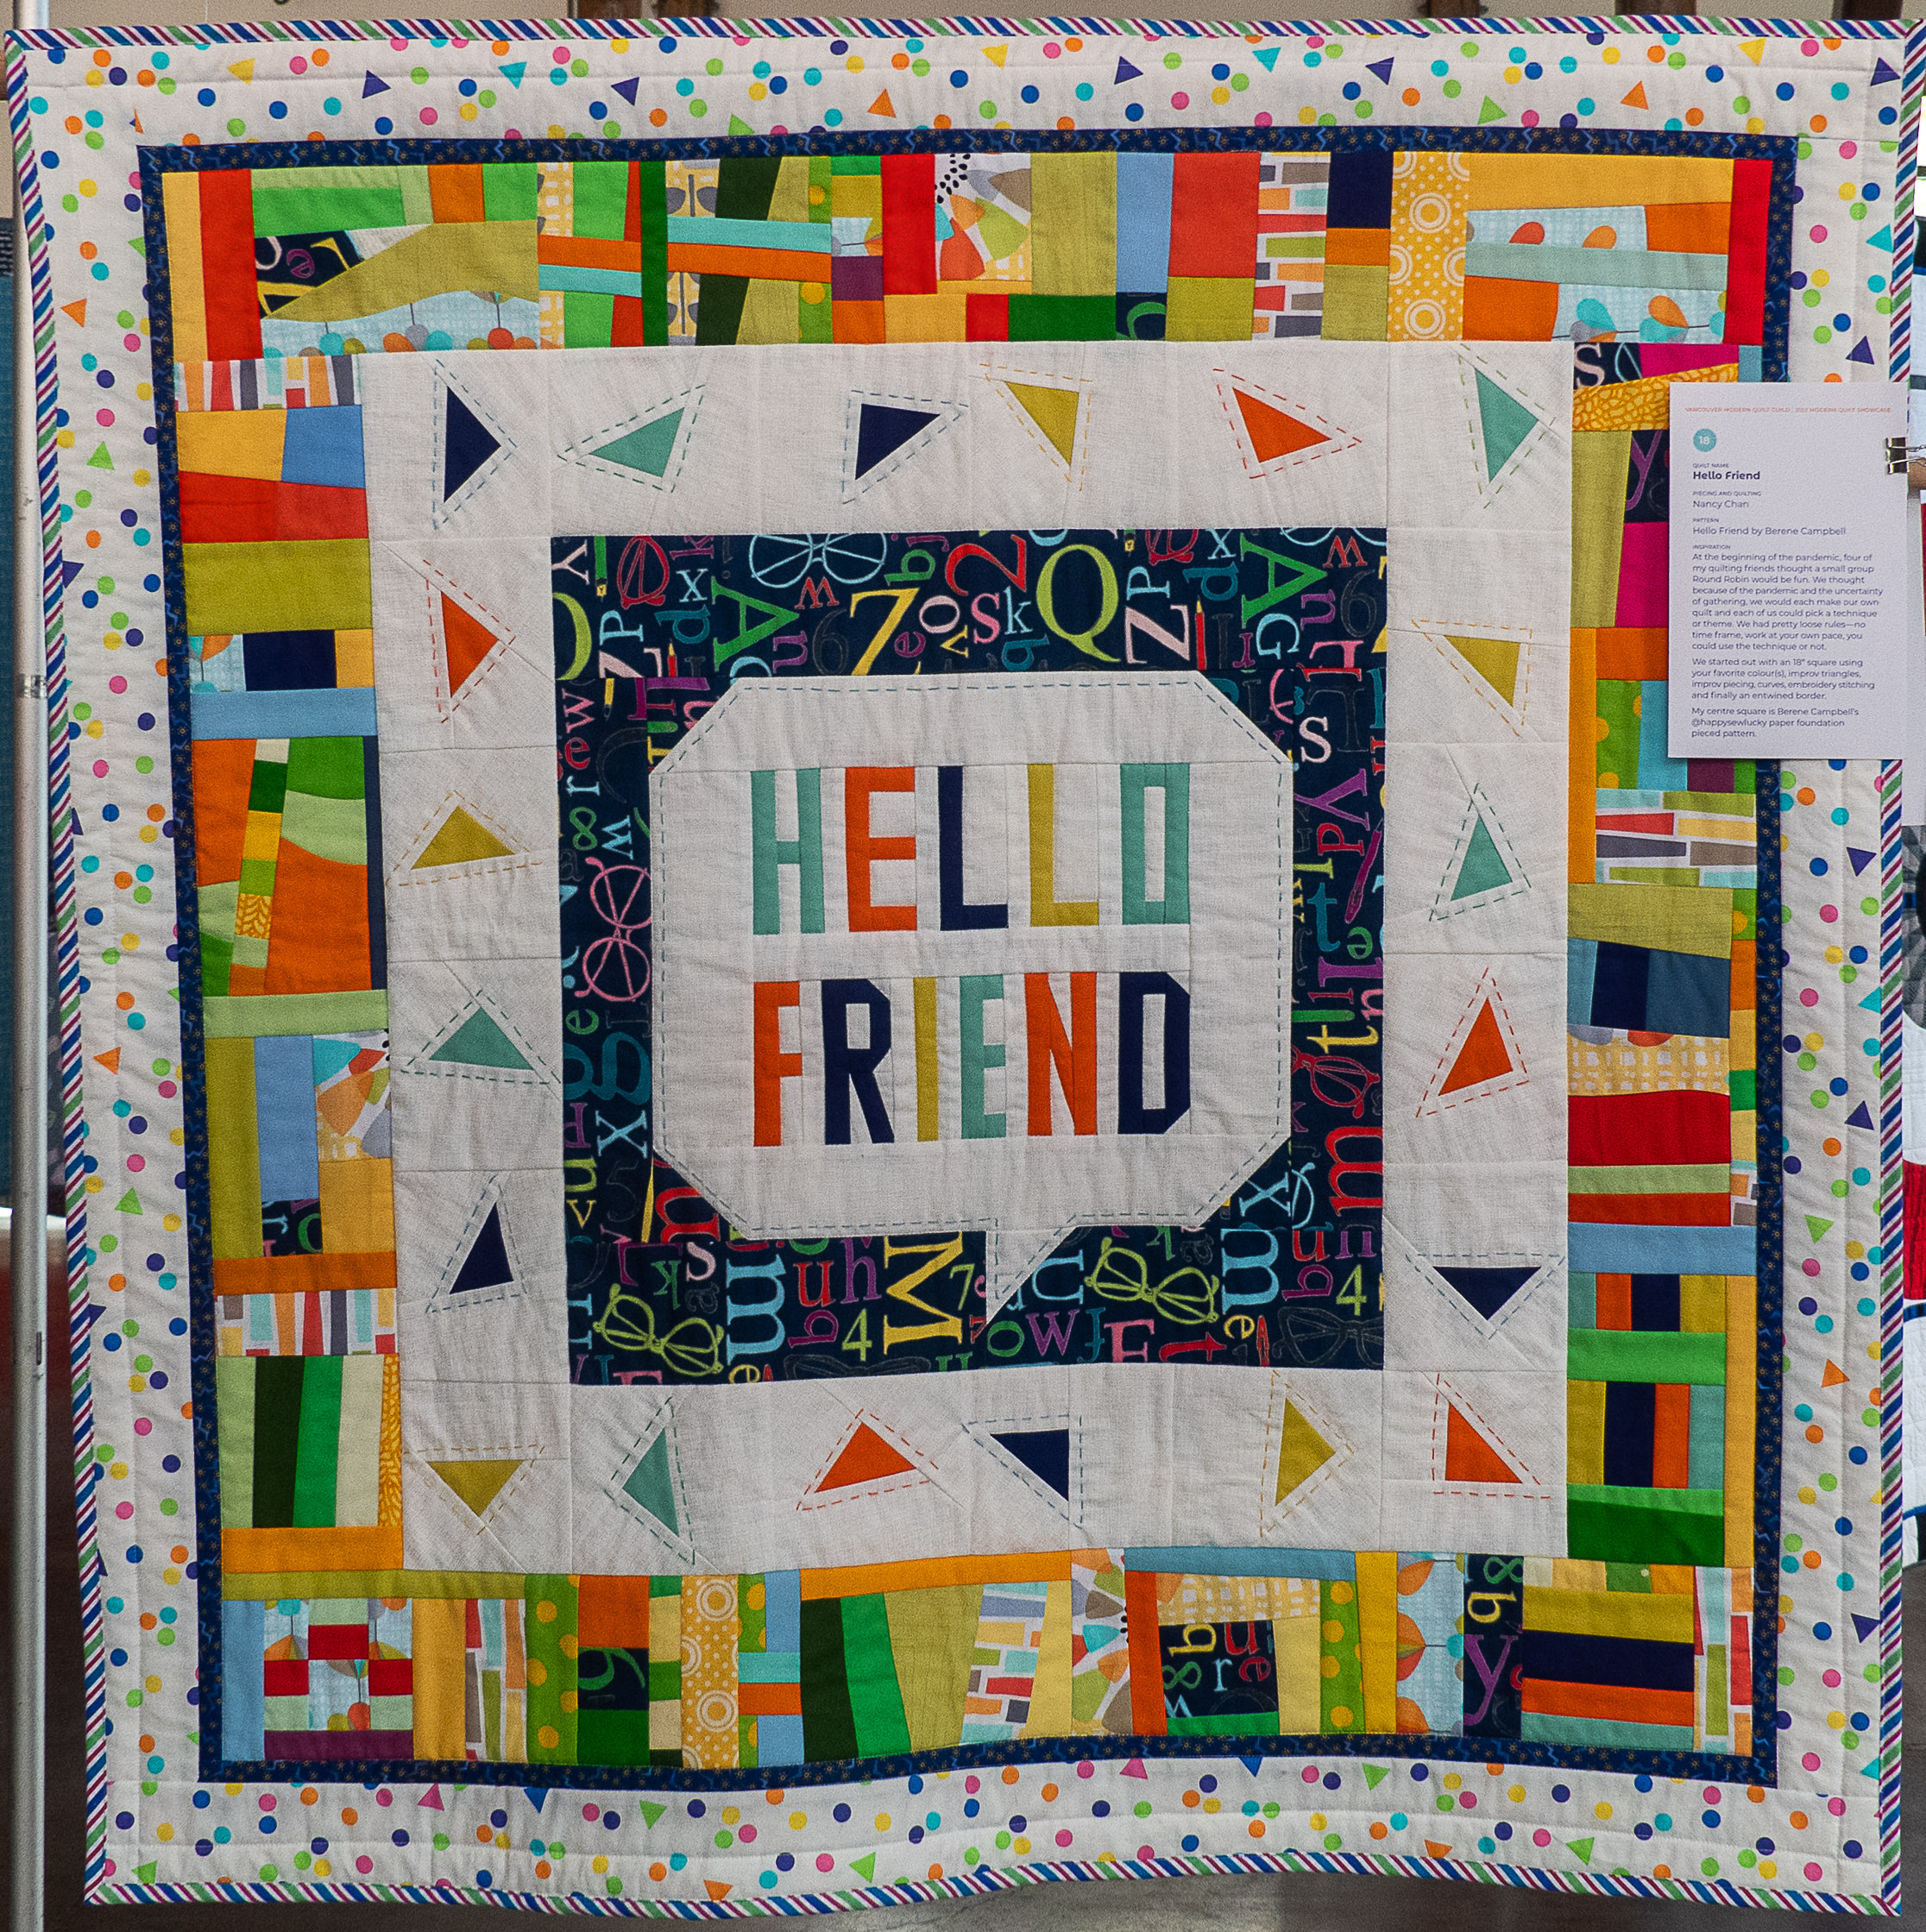 Modern quilt with a dialogue box containing the words "hello friend"